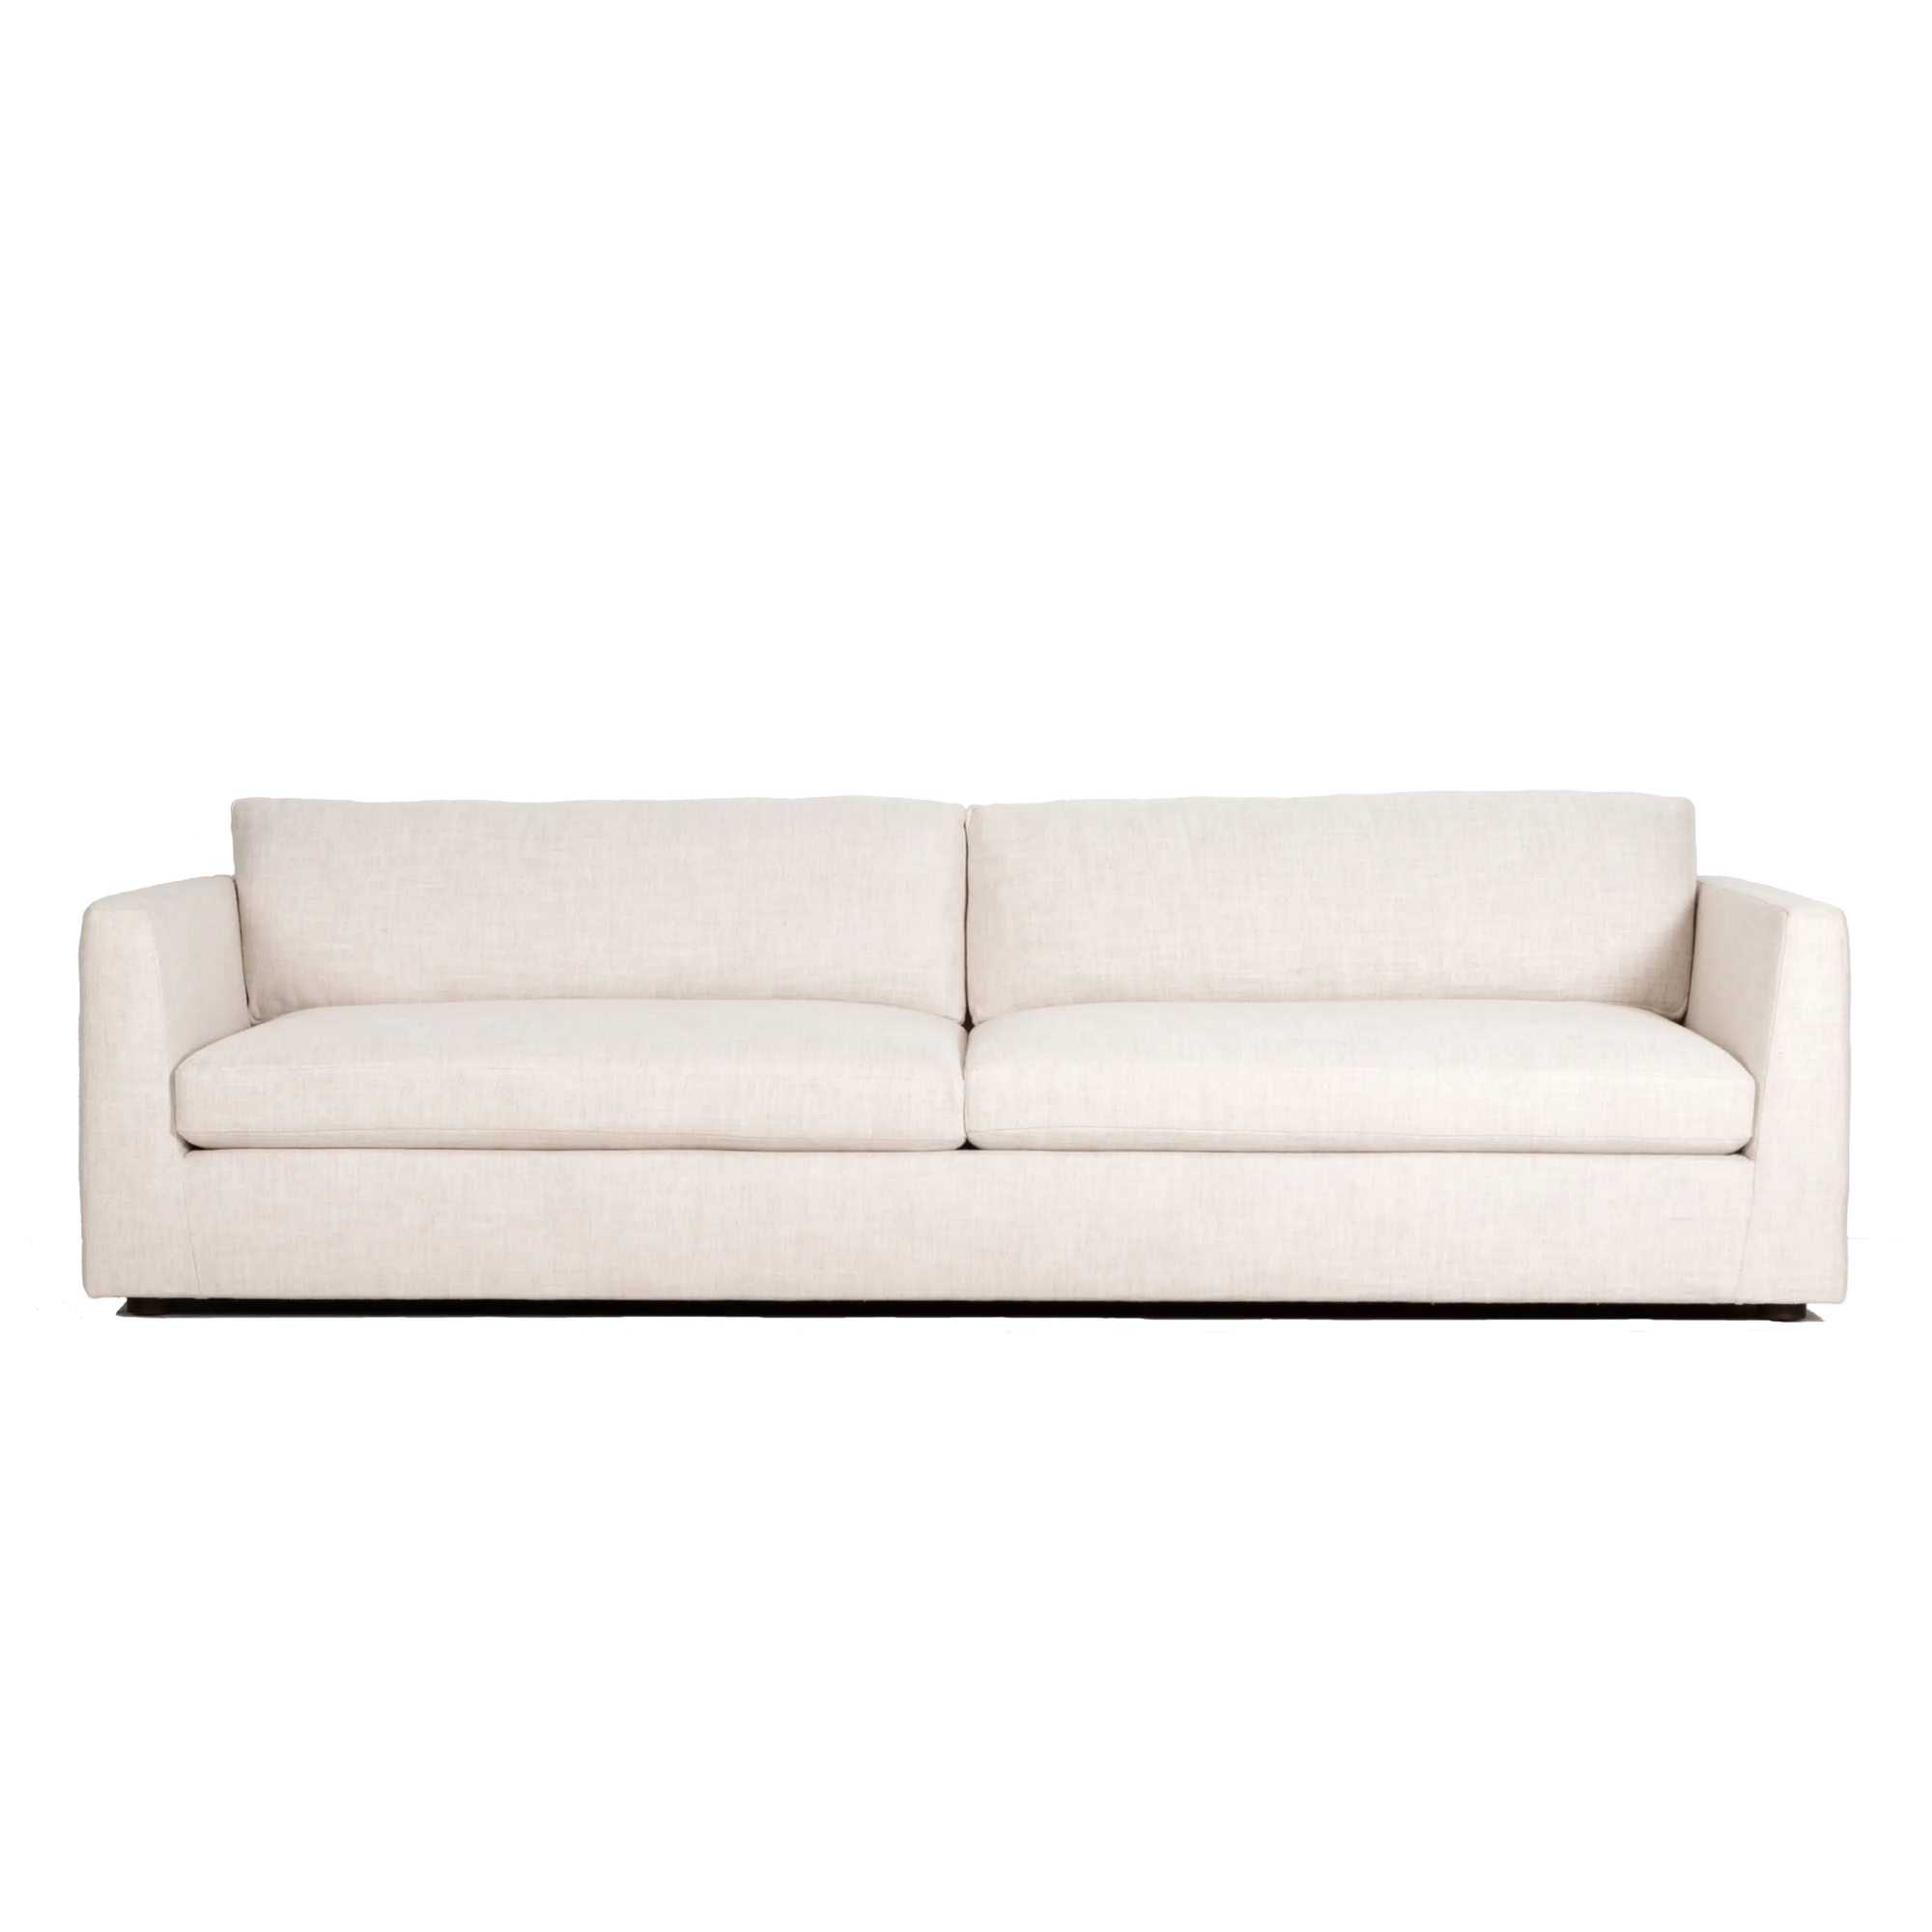 Experience the essence of Danish Modernism reimagined with our Kore Sofa Collection, a tribute to the iconic design legacy of Borge Mogensen.